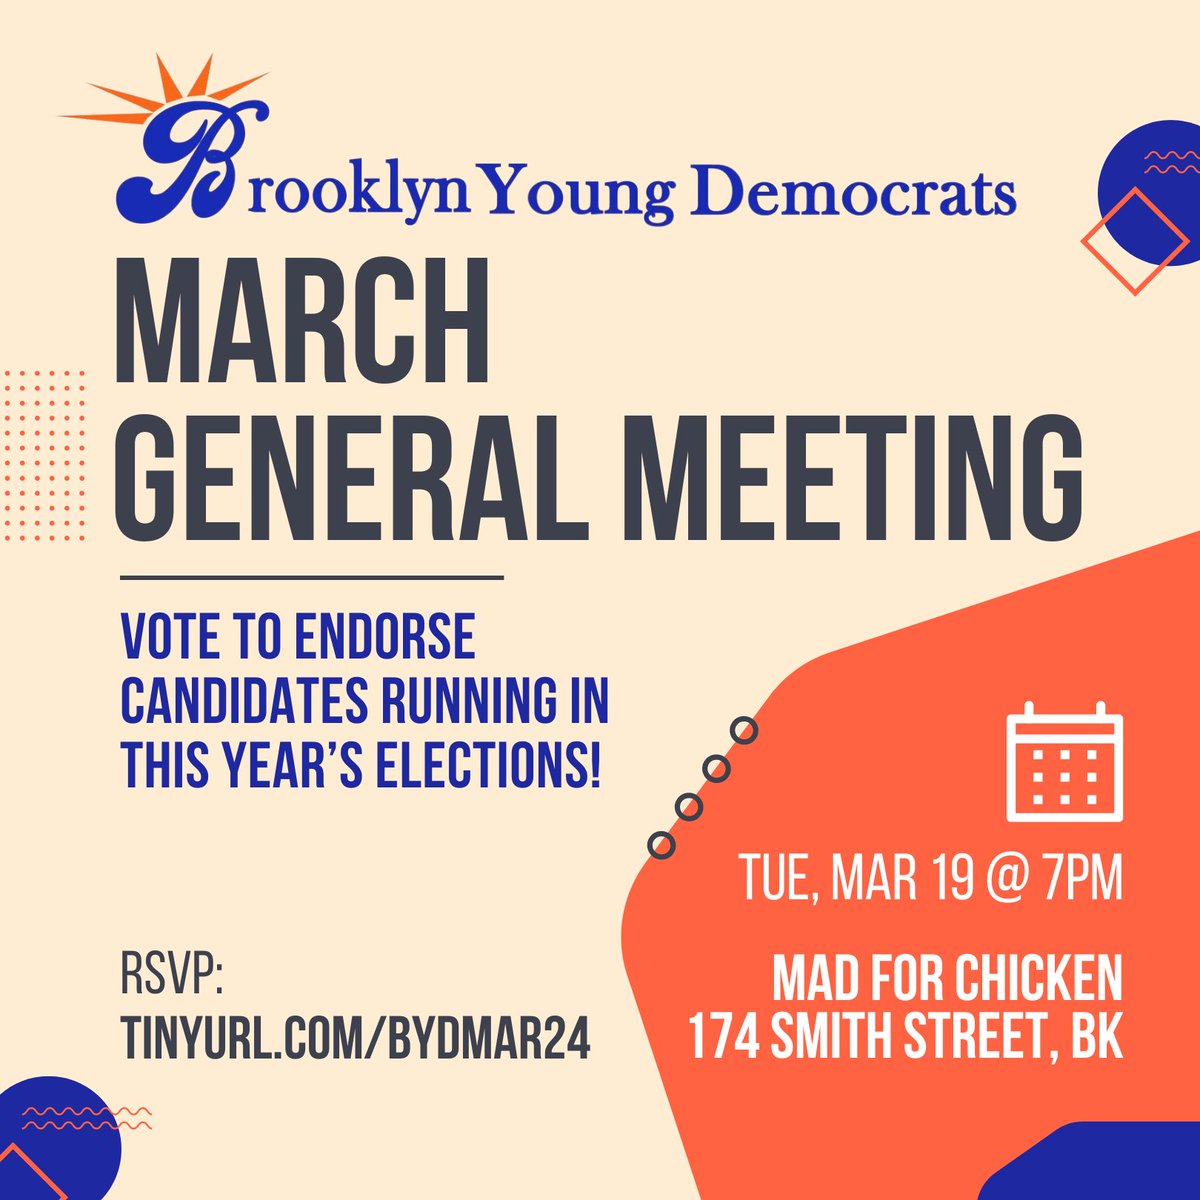 Meet BYD in Cobble Hill on Tuesday, March 19 for our next general meeting! We'll be considering endorsements for Brooklyn candidates running in this year's elections. Join us to learn about key races and shape BYD's priorities this election season! RSVP: tinyurl.com/BYDMar24